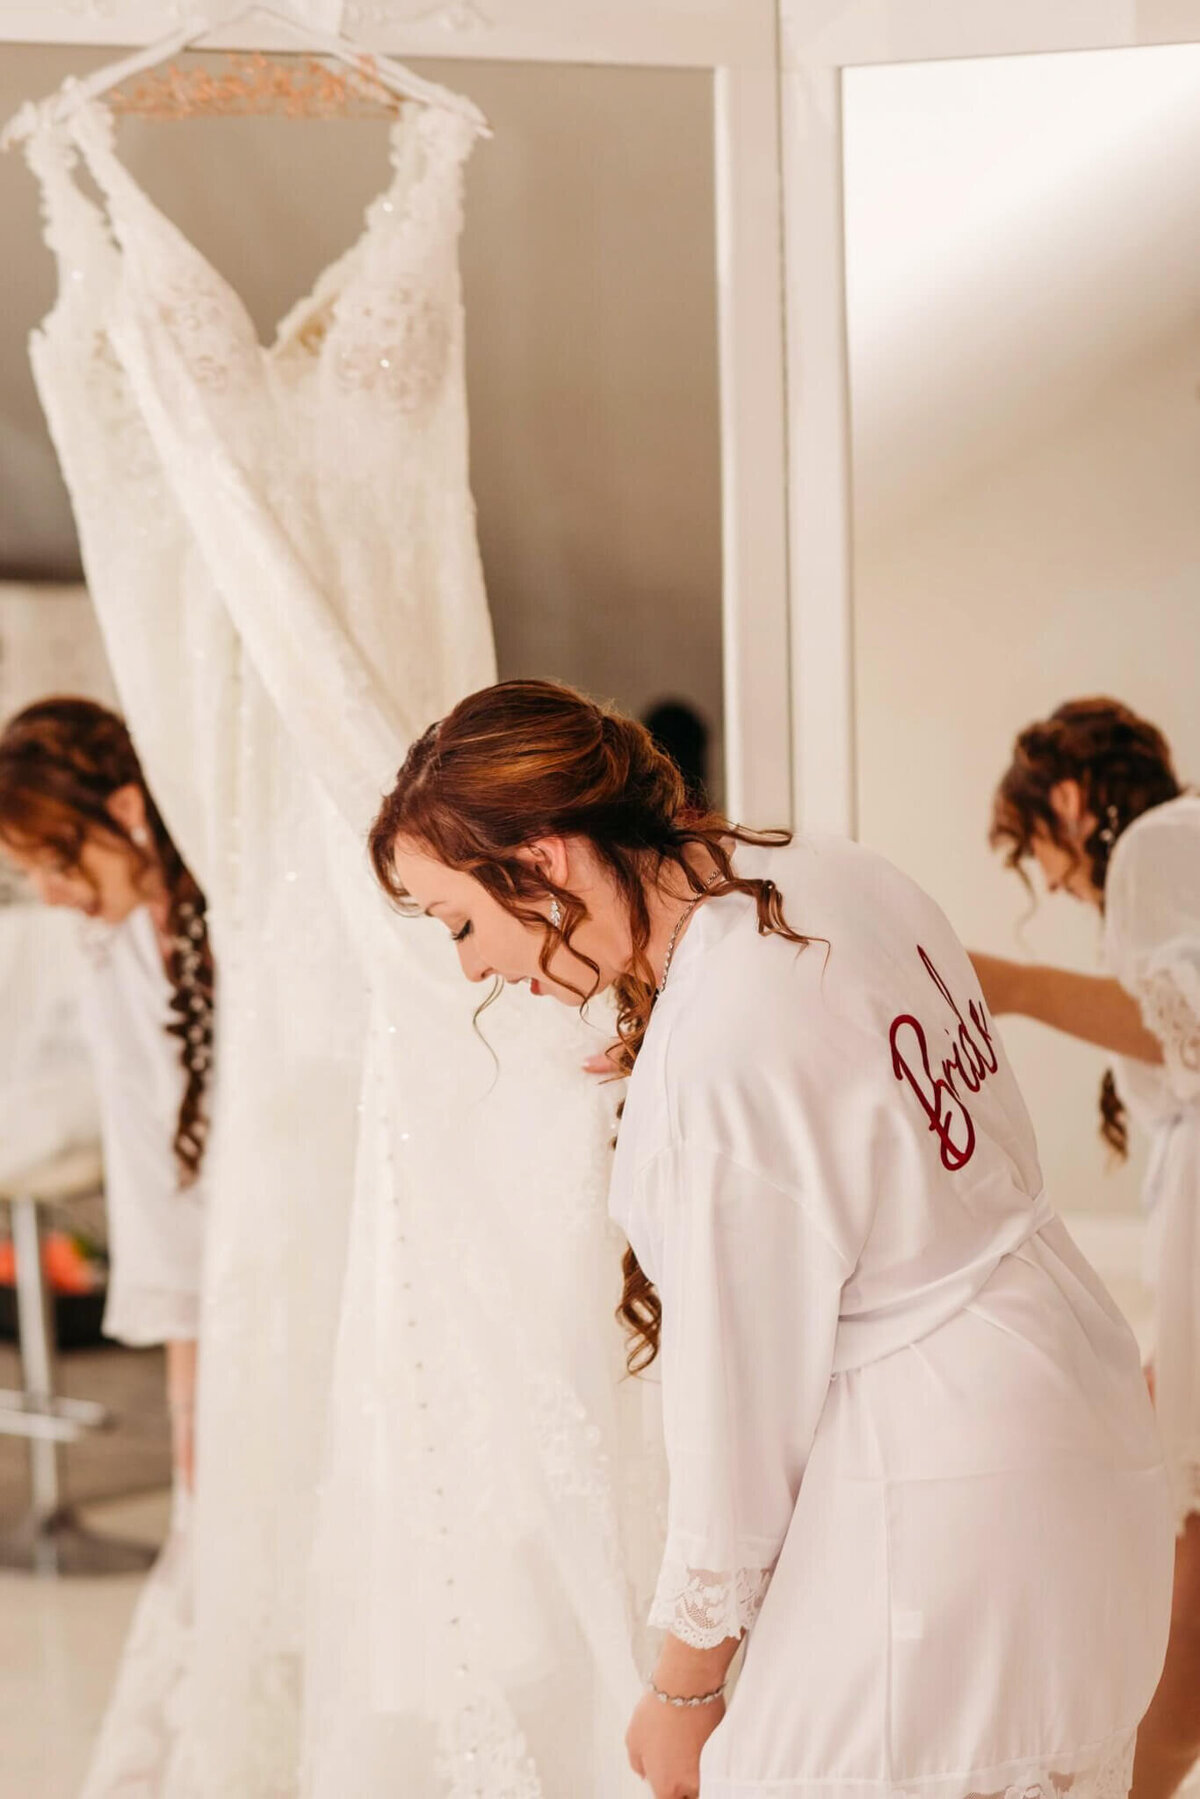 A photo of a bride and a white robe holding her wedding gown